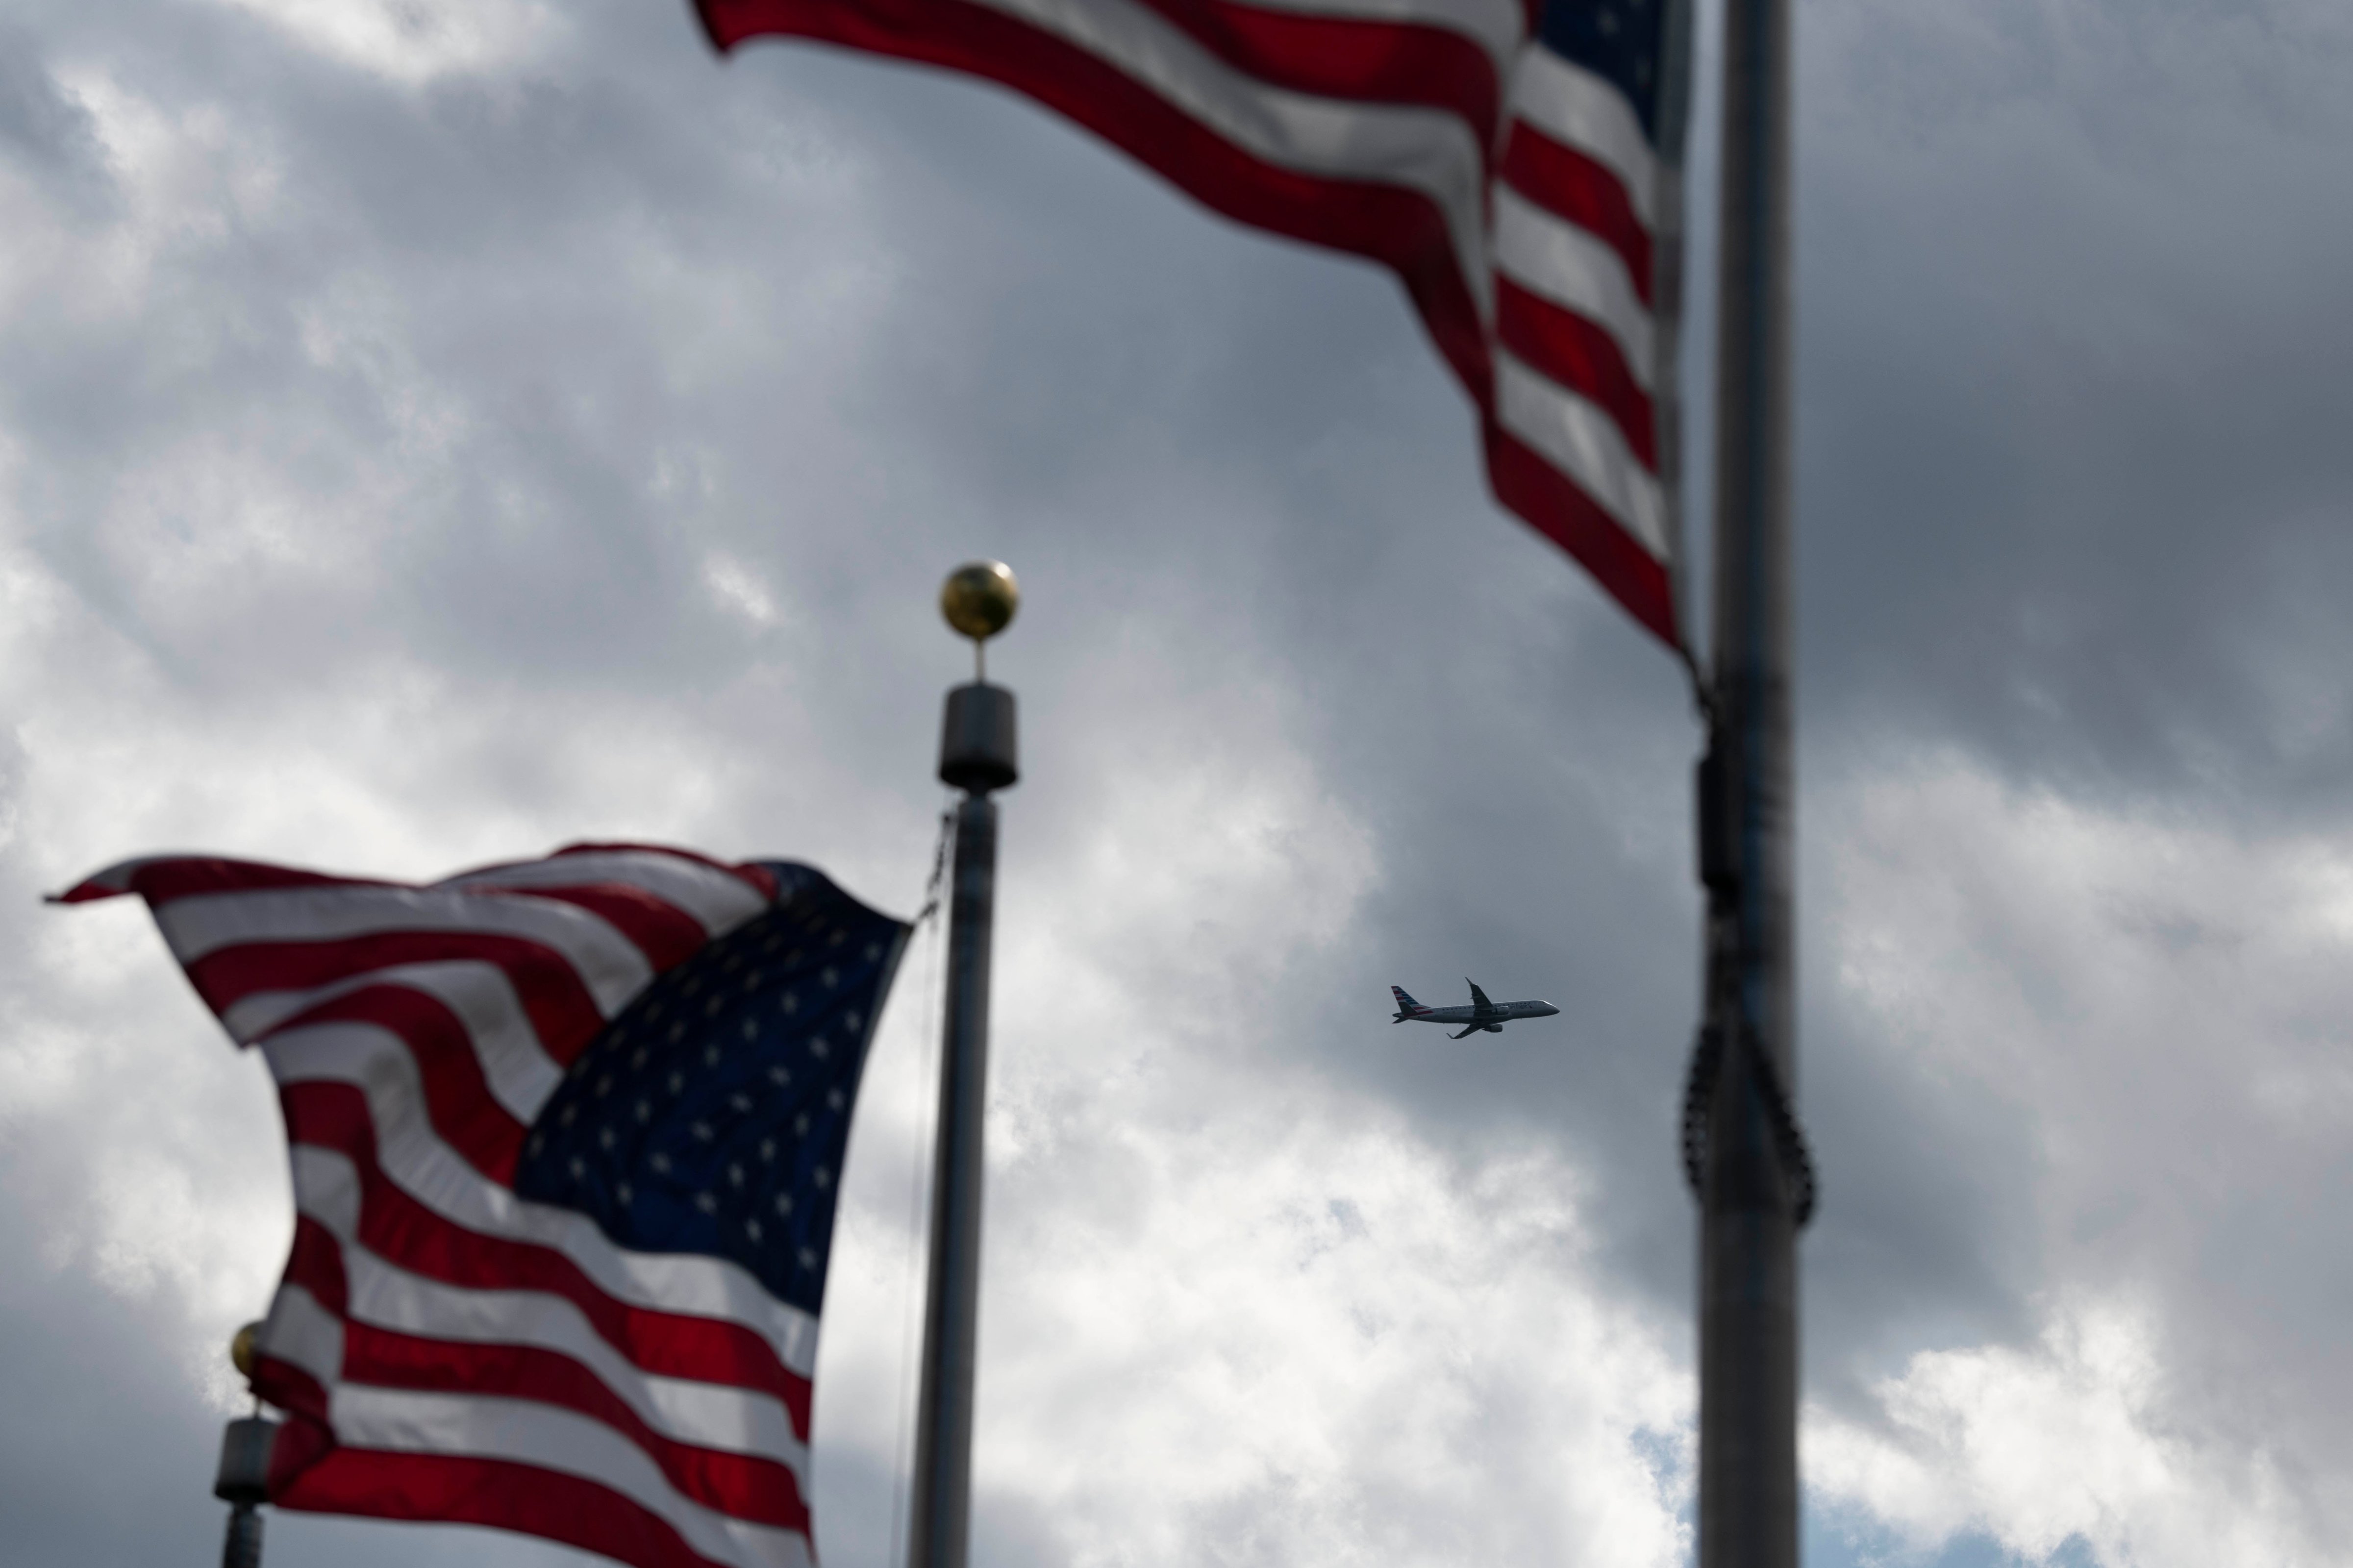 A plane flies in the sky over Washington D.C on April 21, 2020. (Liu Jie—Xinhua News Agency/Getty Images)